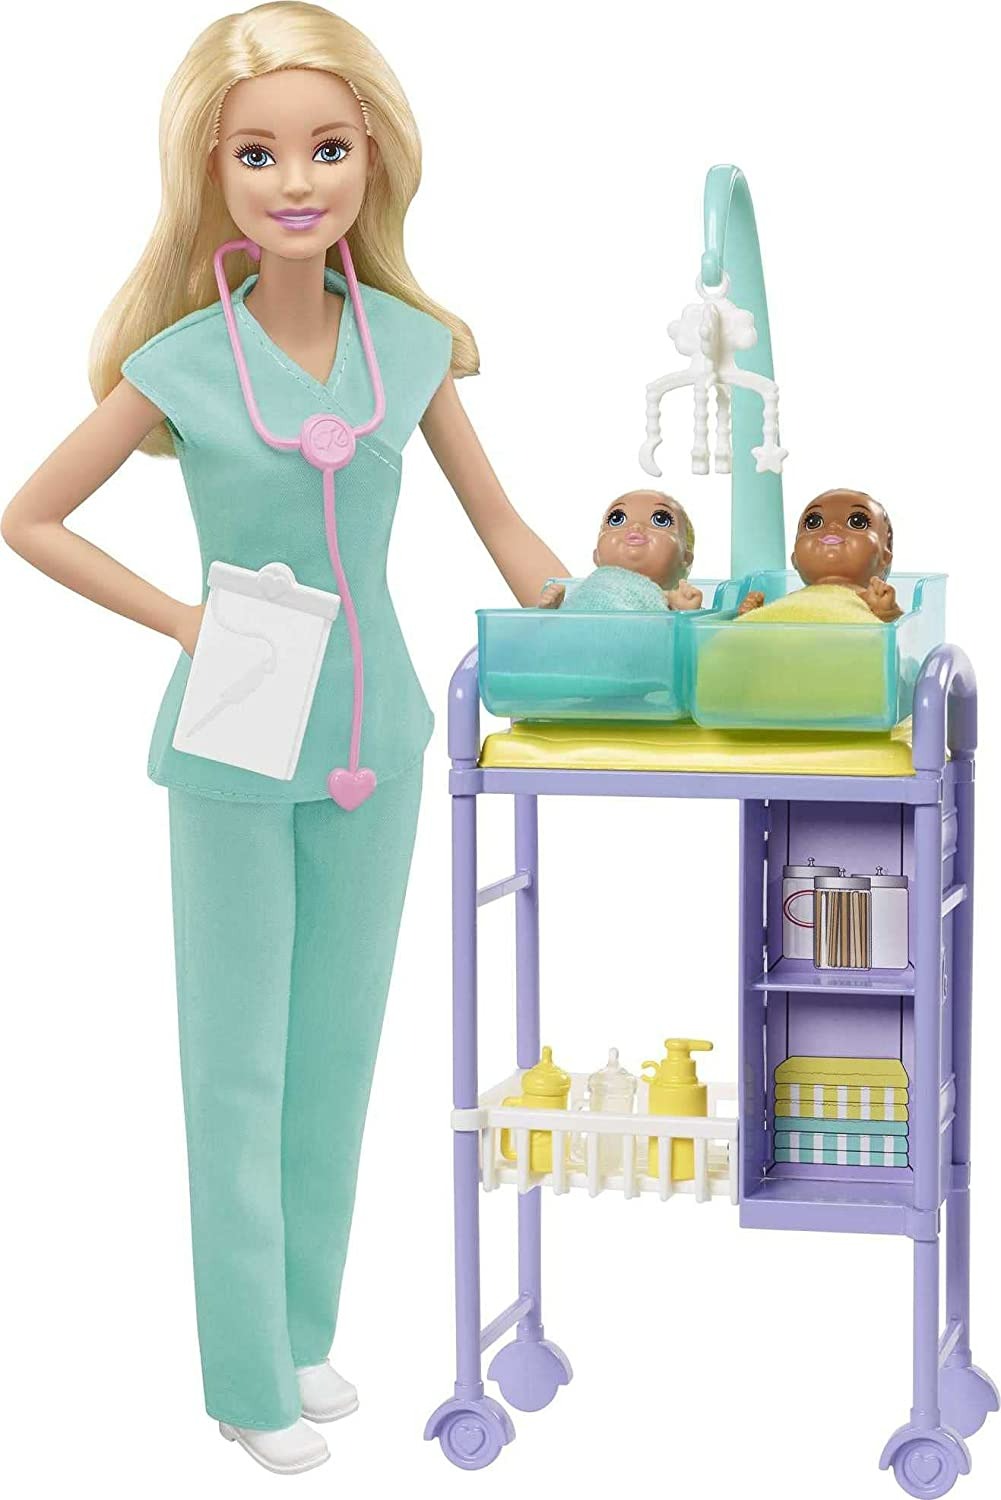 Barbie Careers Doll & Playset - Baby Doctor Theme with Blonde Fashion Doll-0